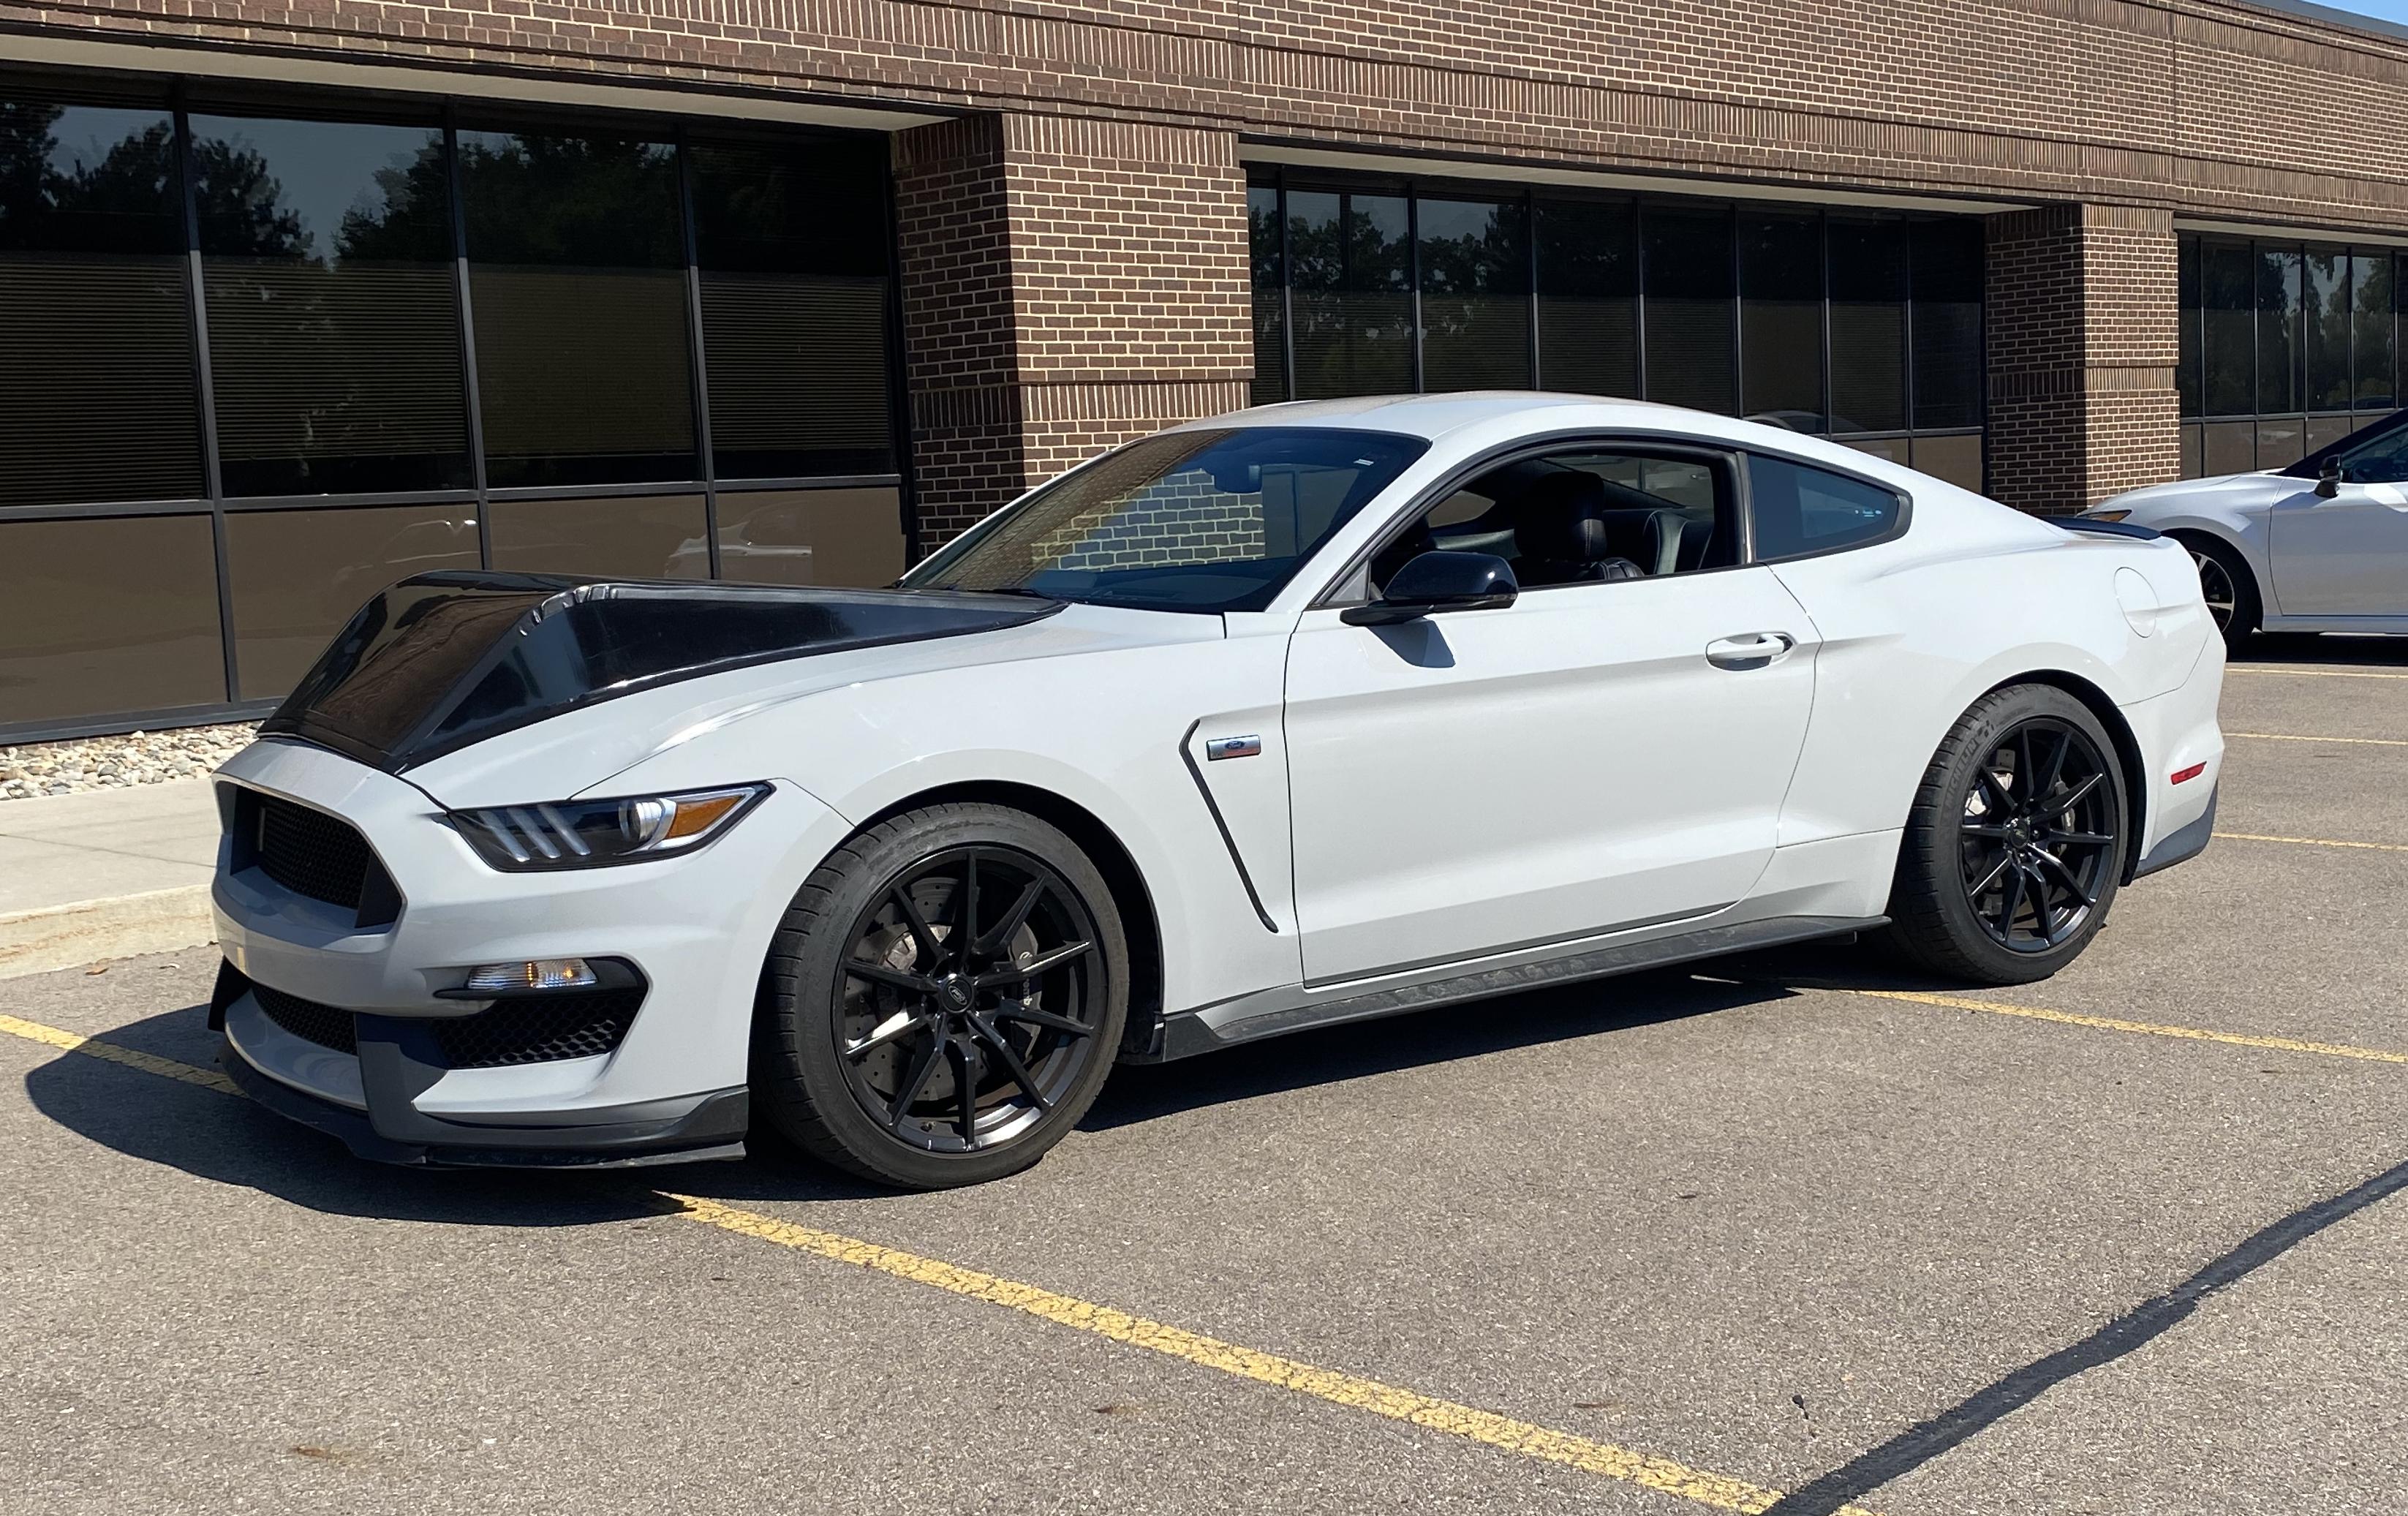 Just what is Ford up to with this rhinoceros-like prototype Mustang?